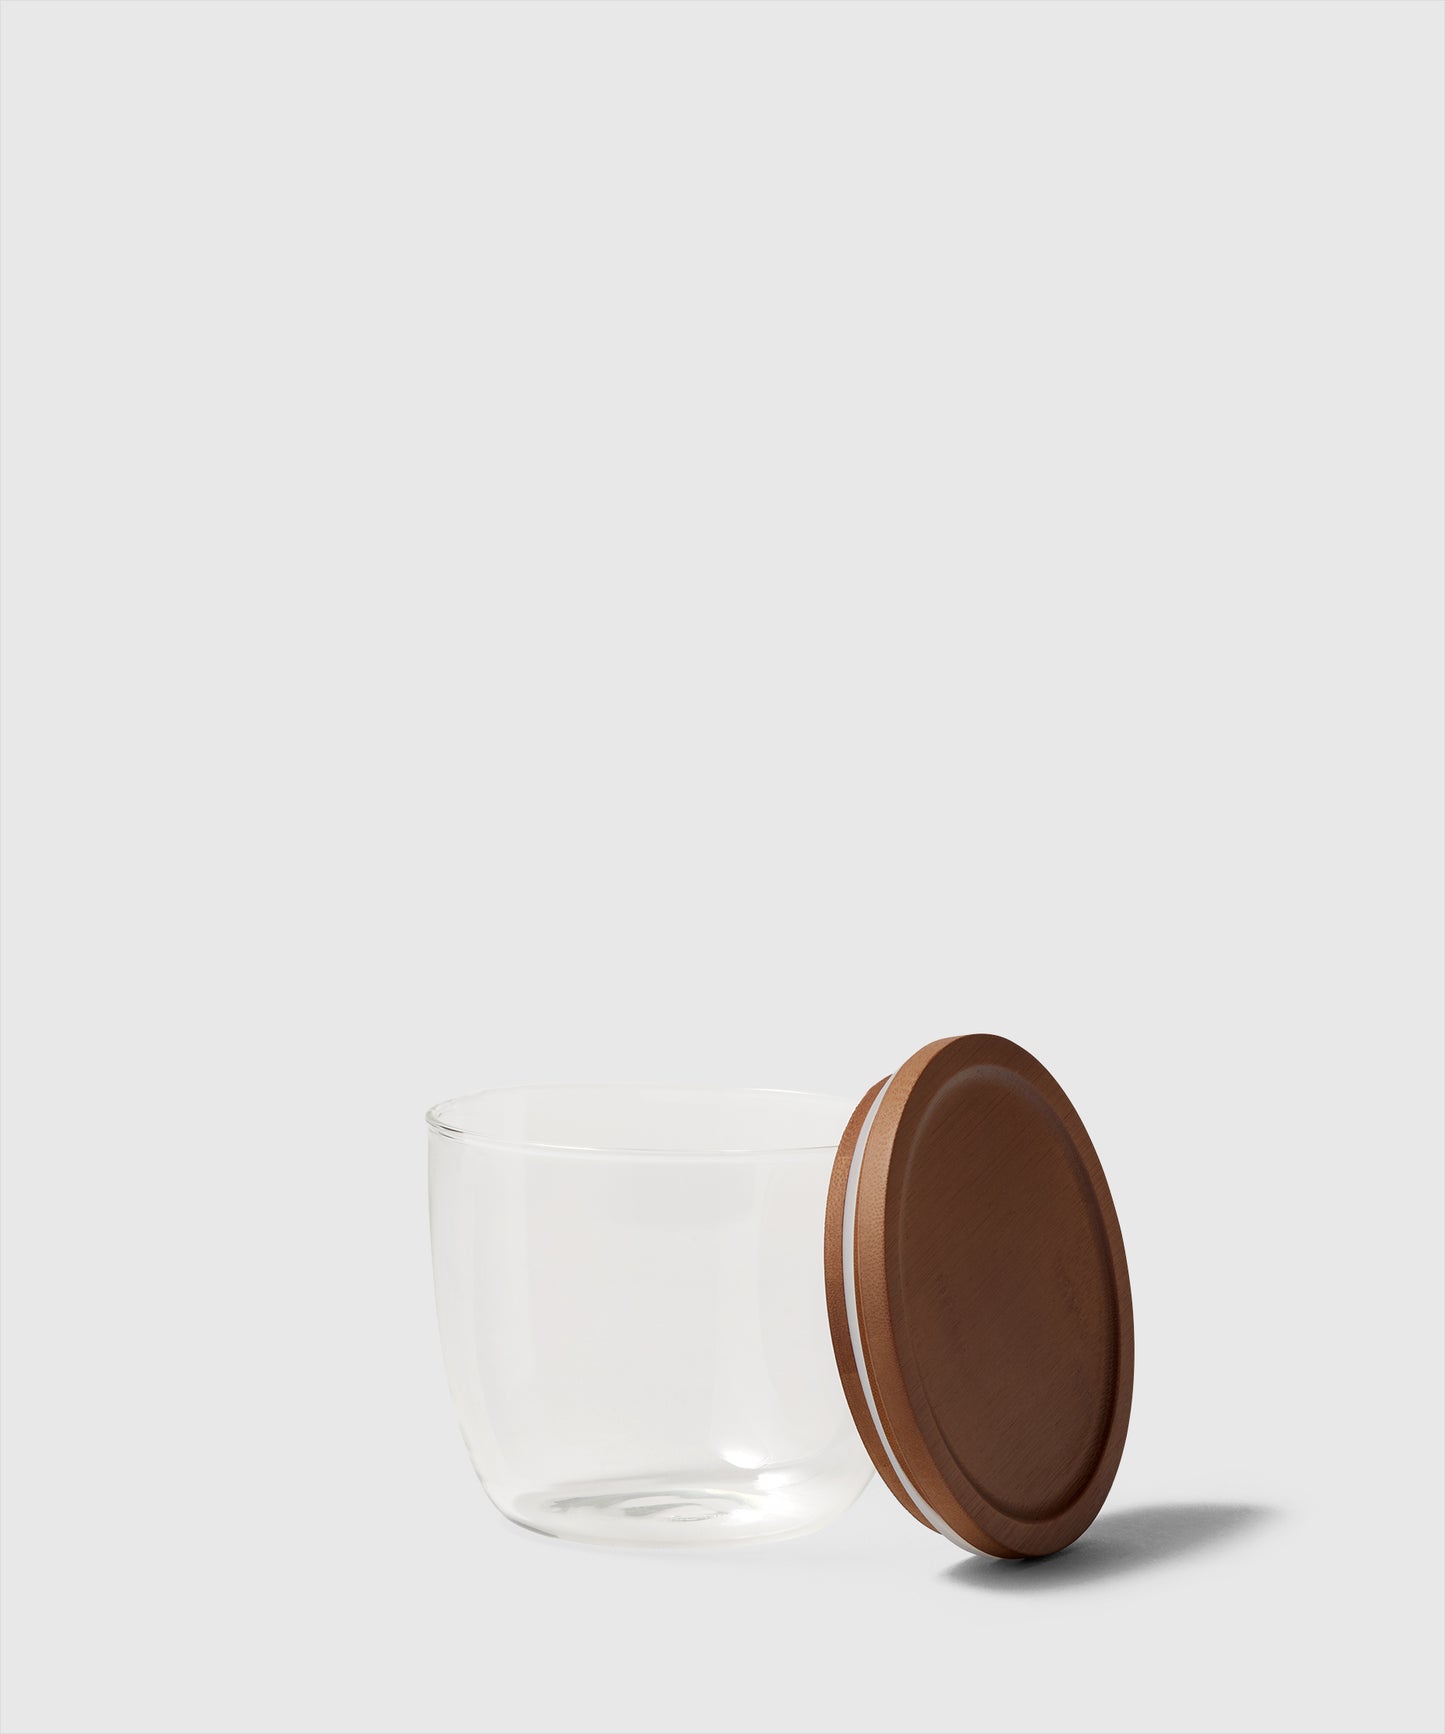 Small Glass Canister With Bamboo Lid | The Container Store x KonMari